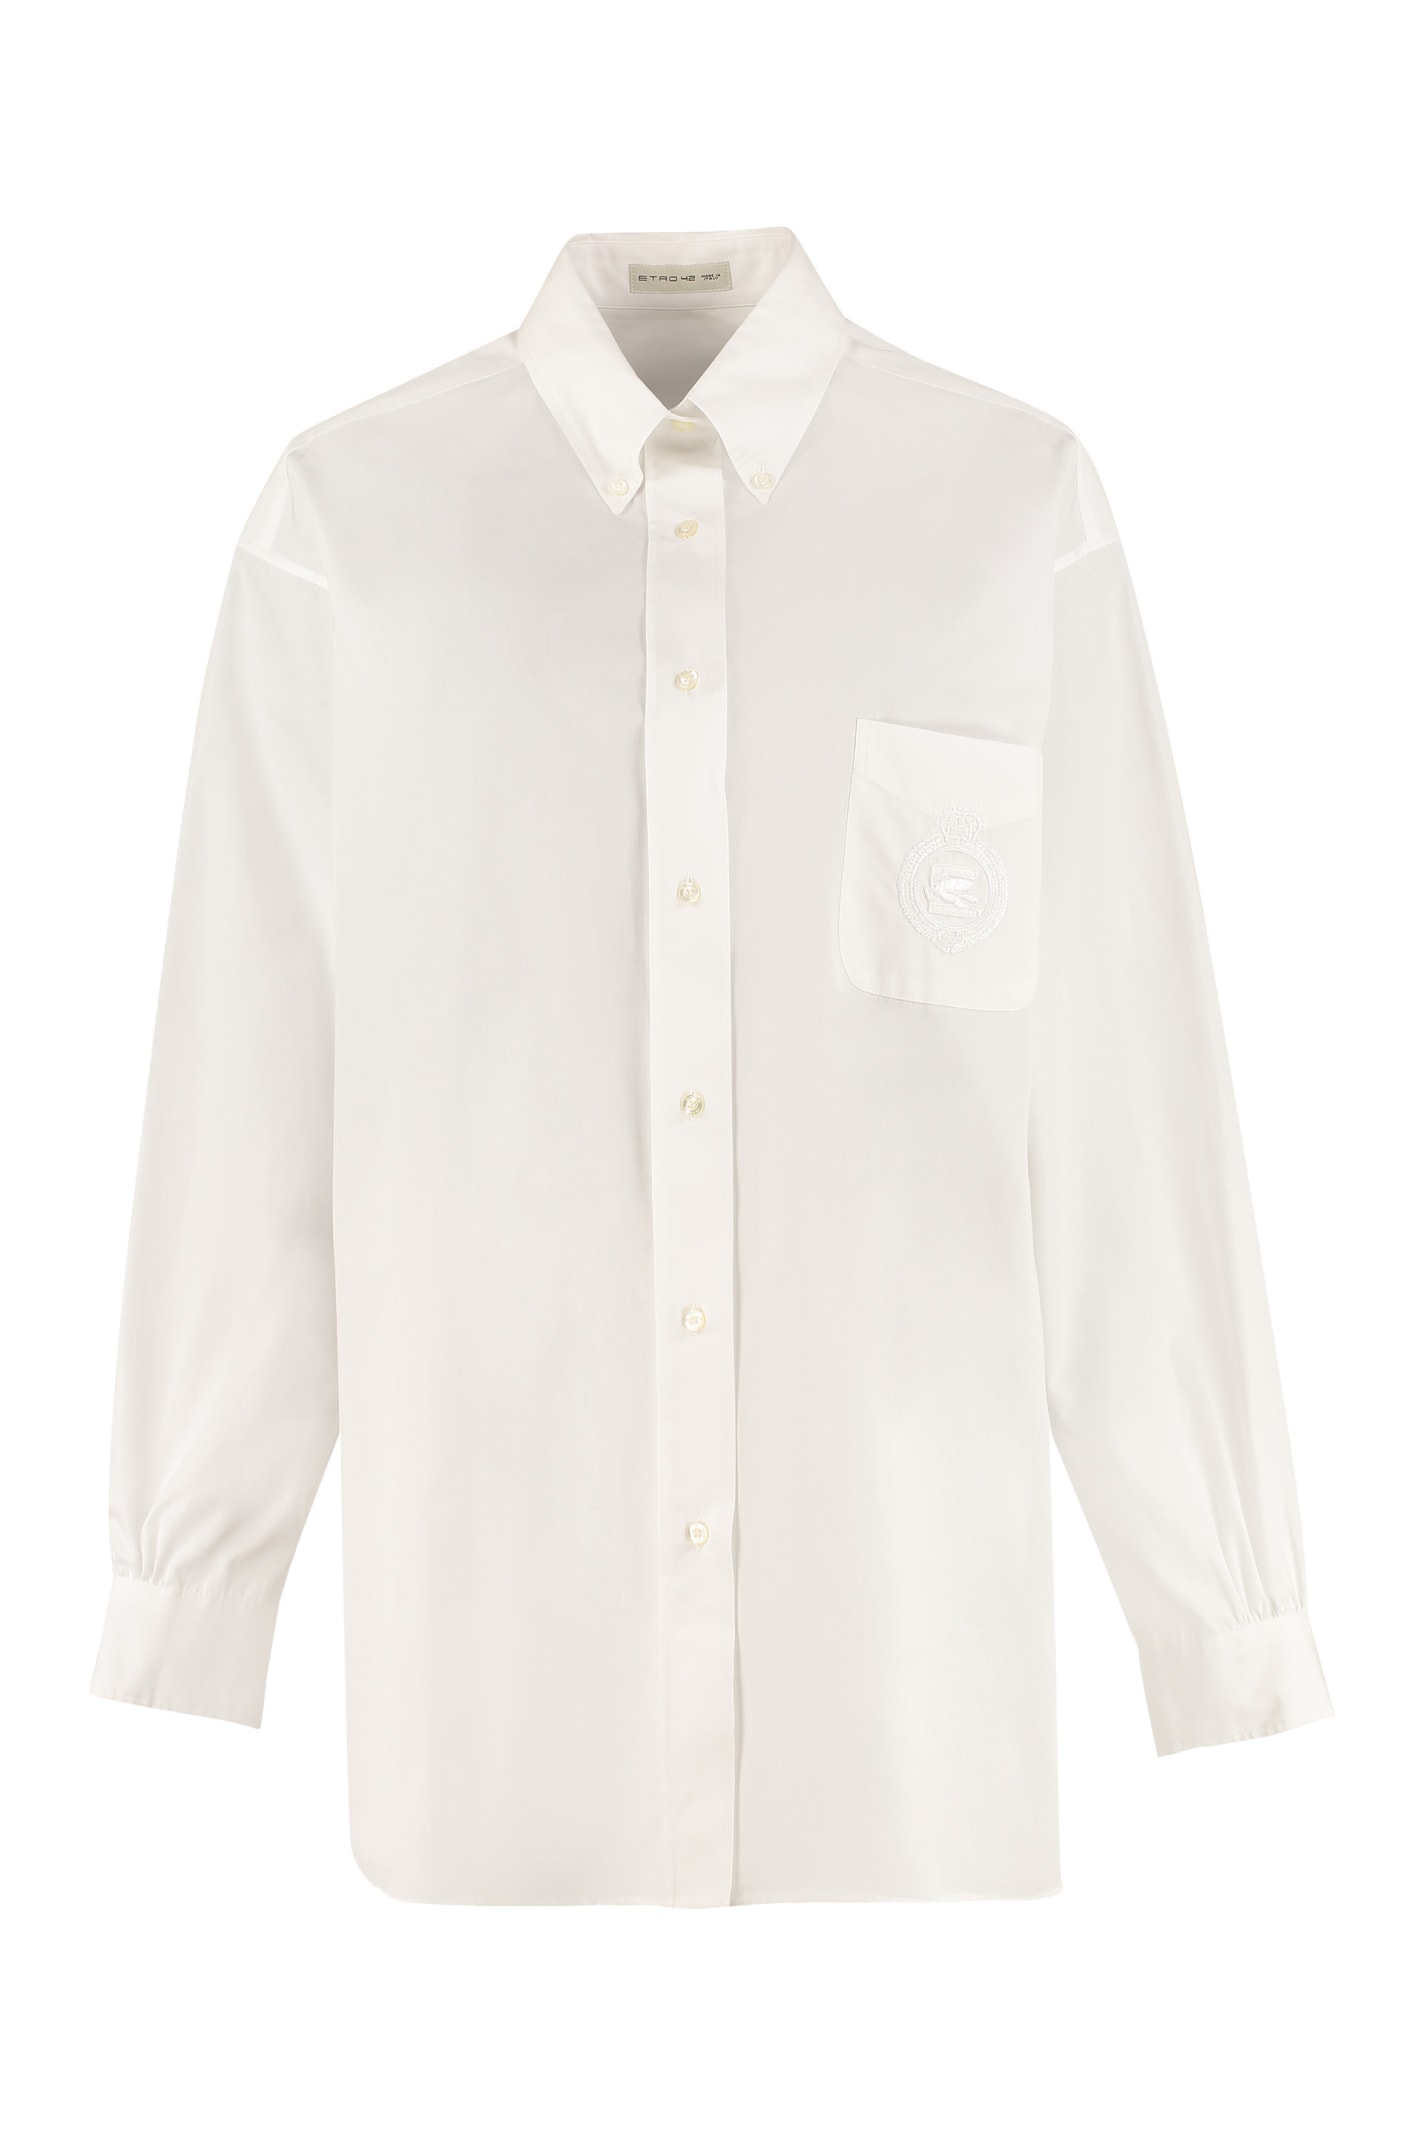 ETRO COTTOND SHIRT WITH EMBROIDERED LOGO,11353214